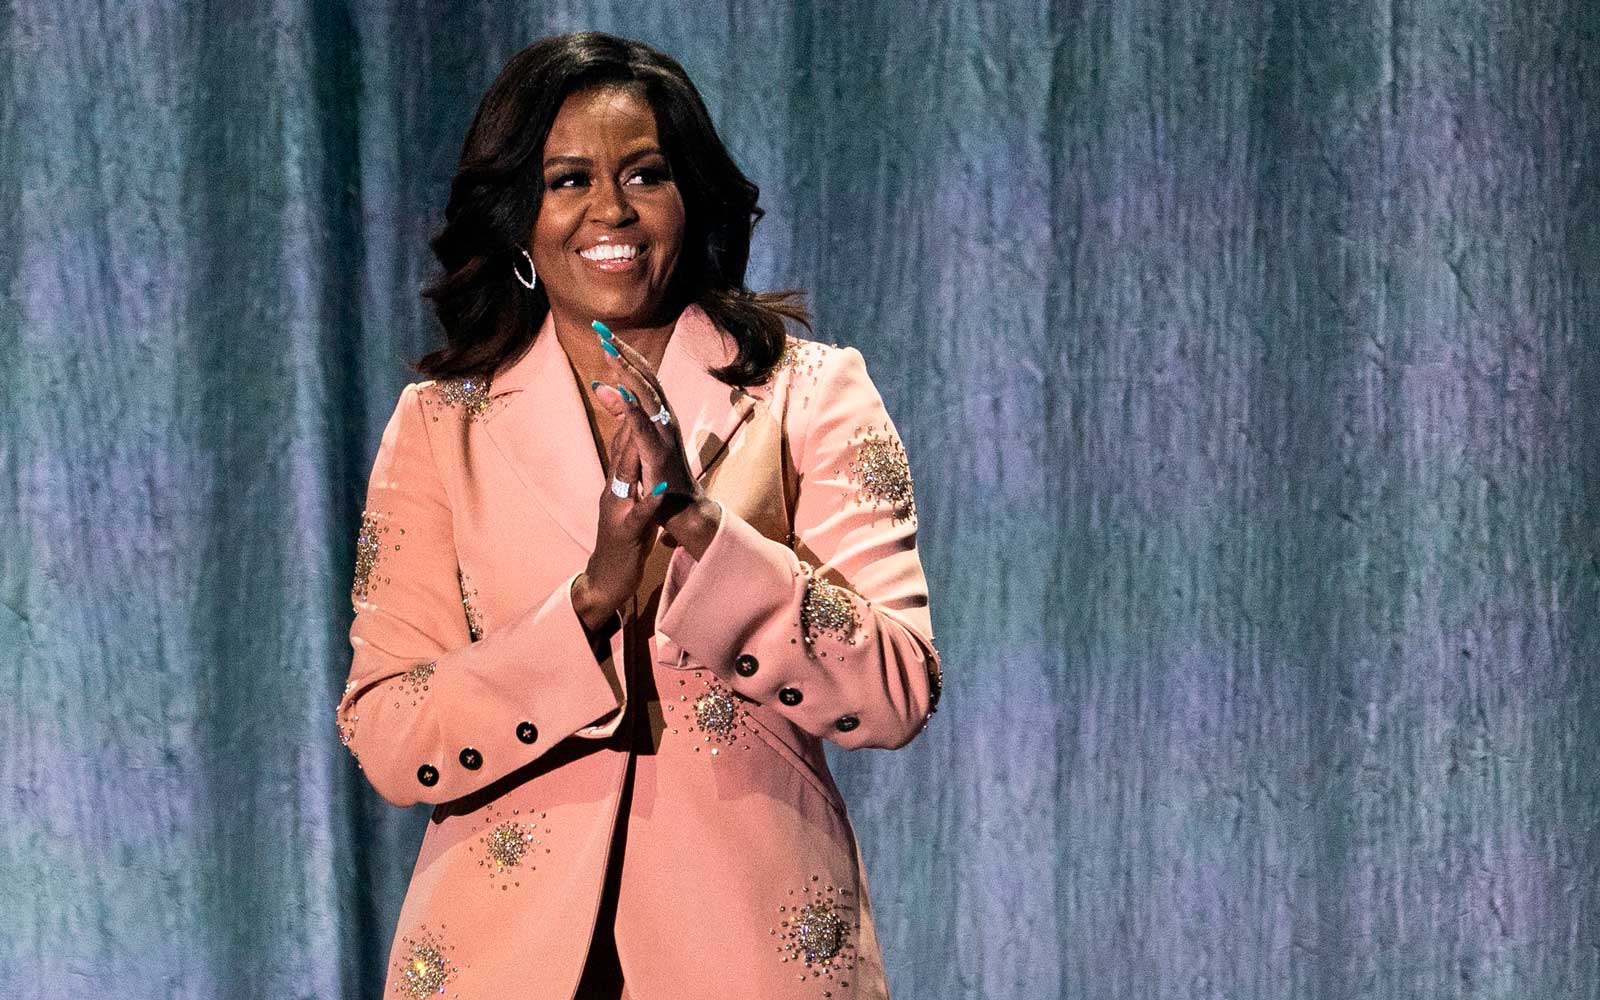 Michelle Obama to launch IGTV series about college students - www.foxnews.com